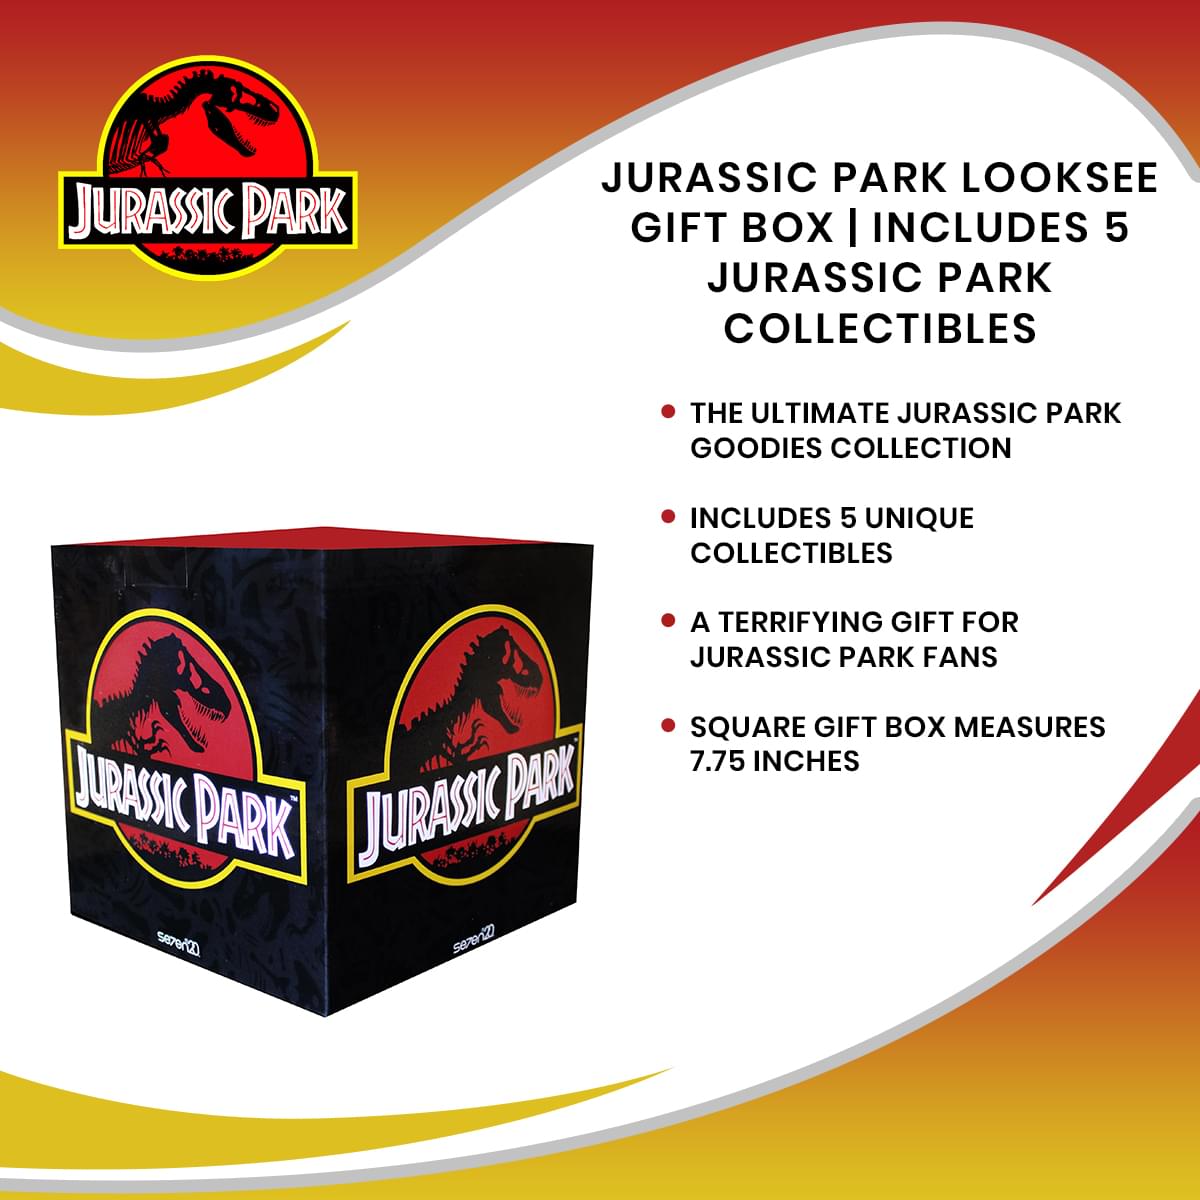 Jurassic Park Looksee Gift Box | Includes 5 Jurassic Park Collectibles